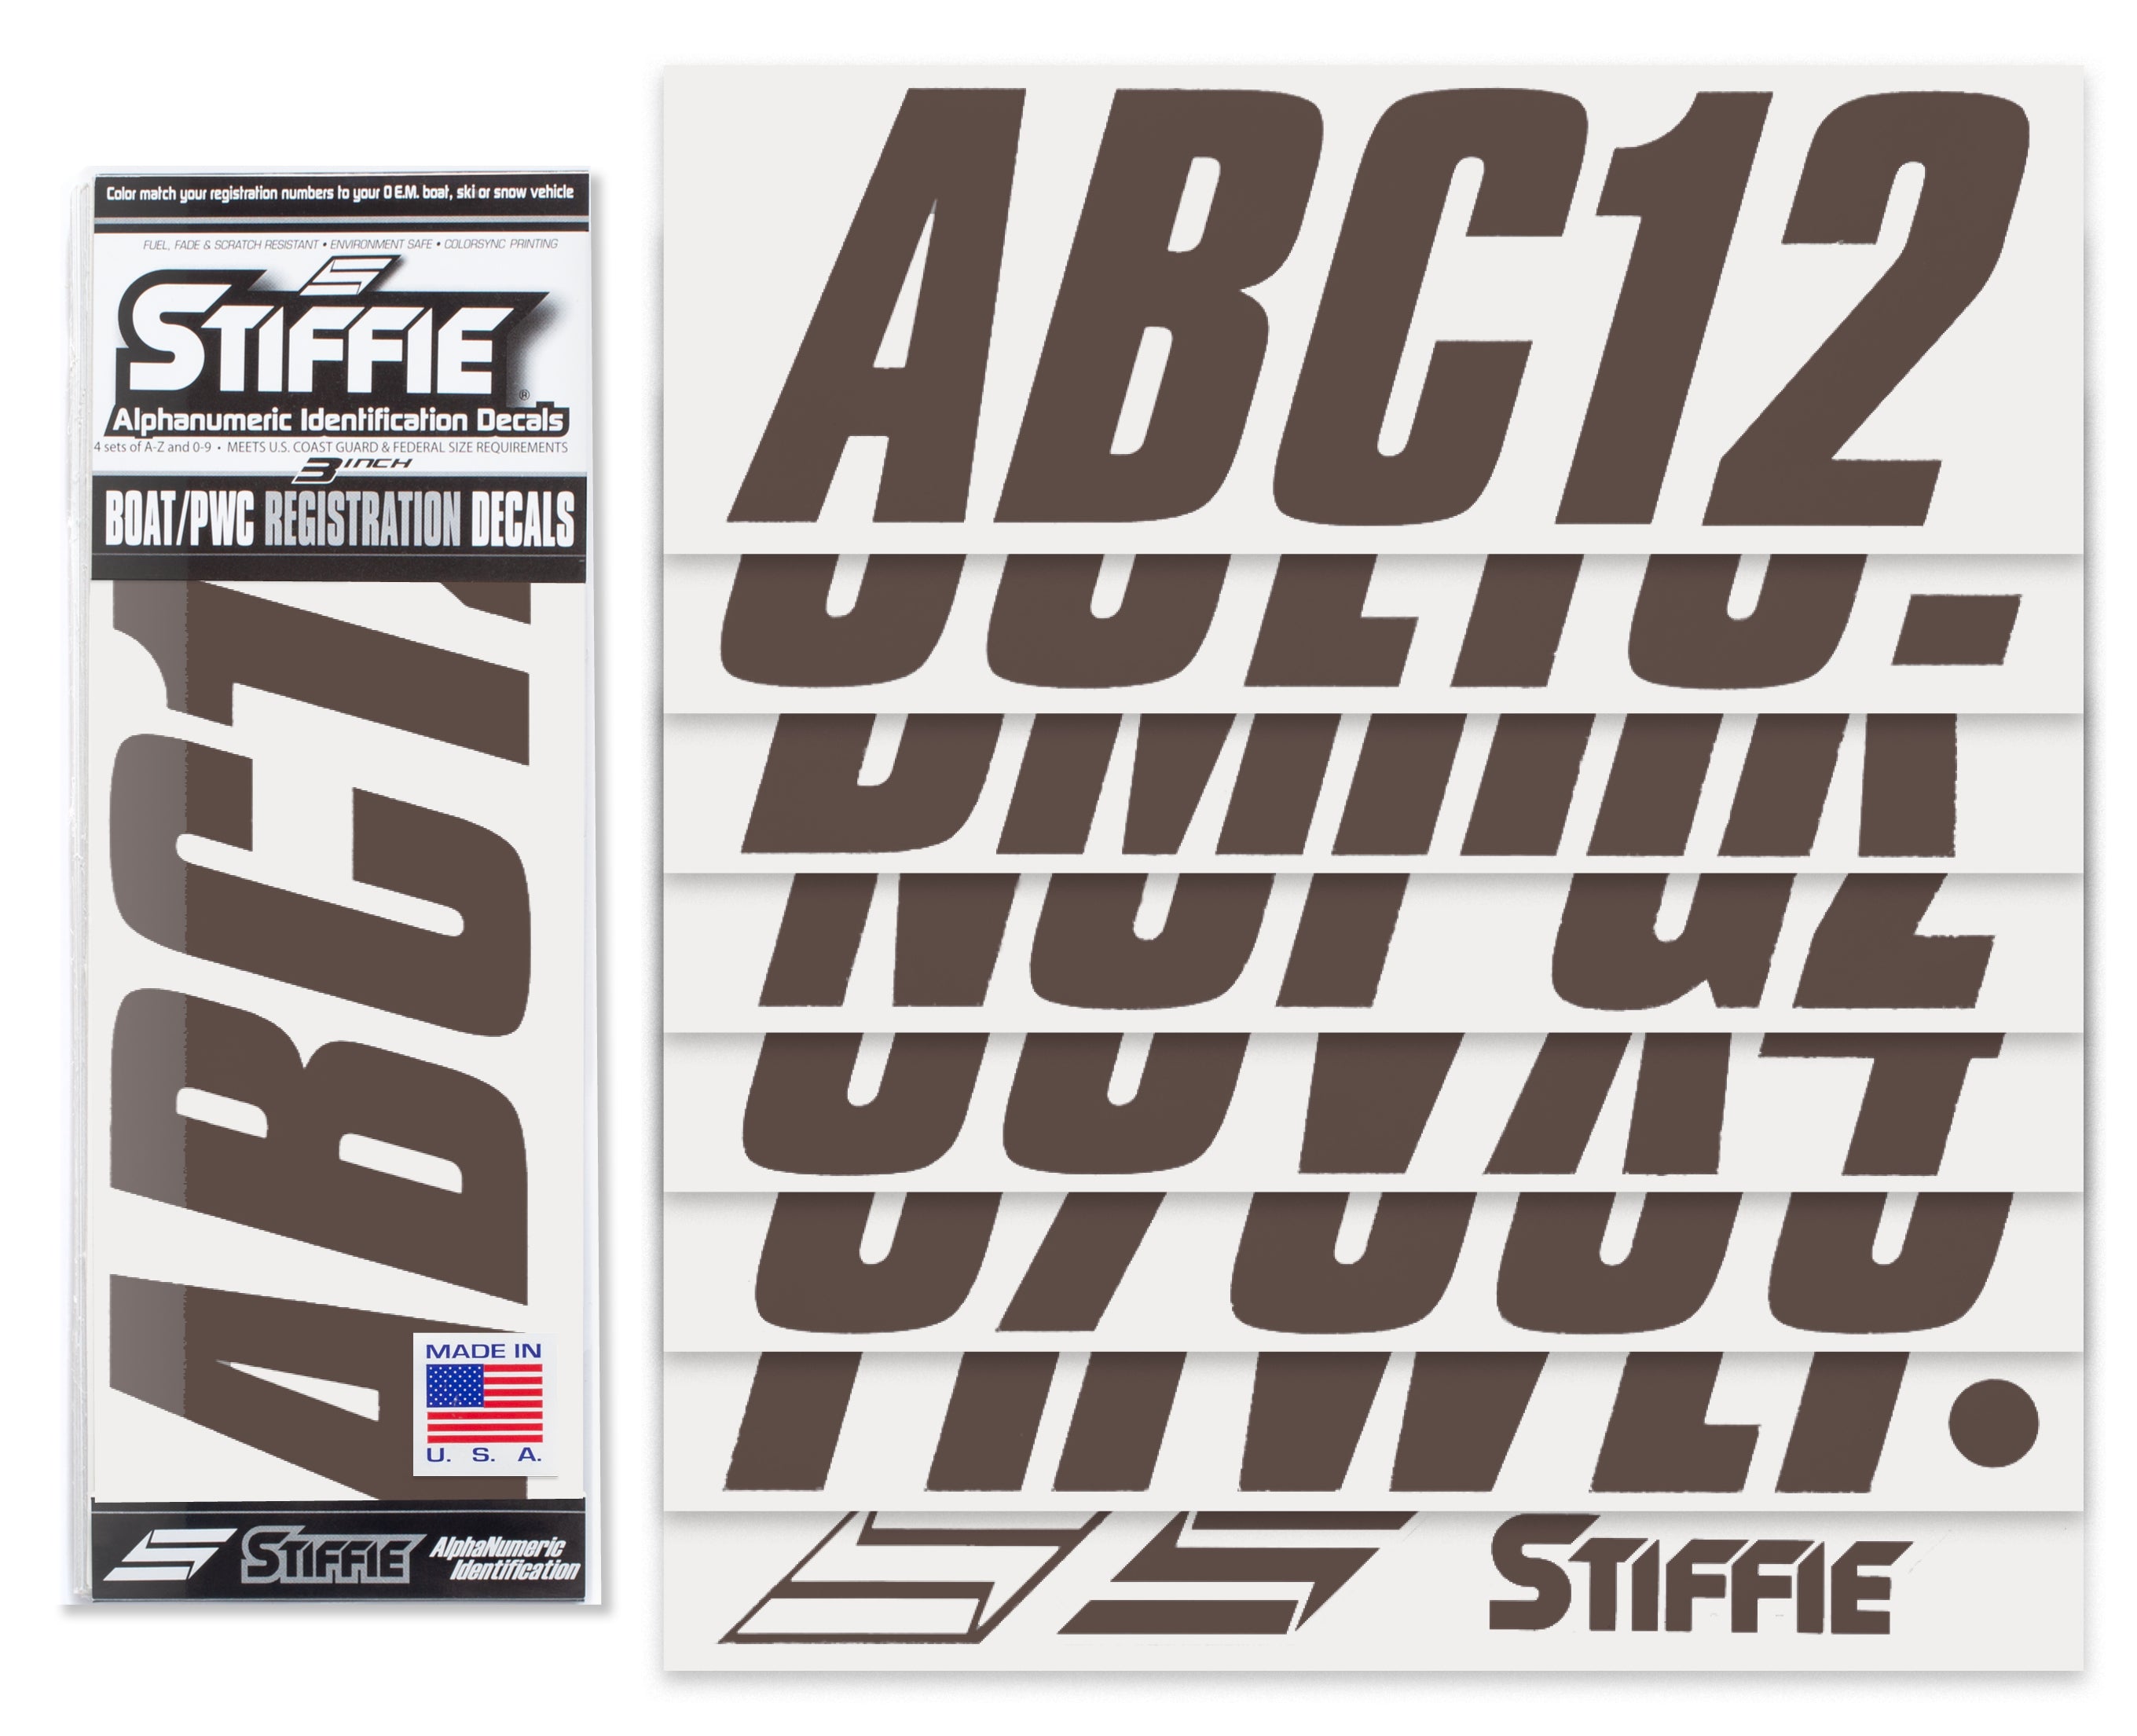 STIFFIE Shift Brown 3" ID Kit Alpha-Numeric Registration Identification Numbers Stickers Decals for Boats & Personal Watercraft